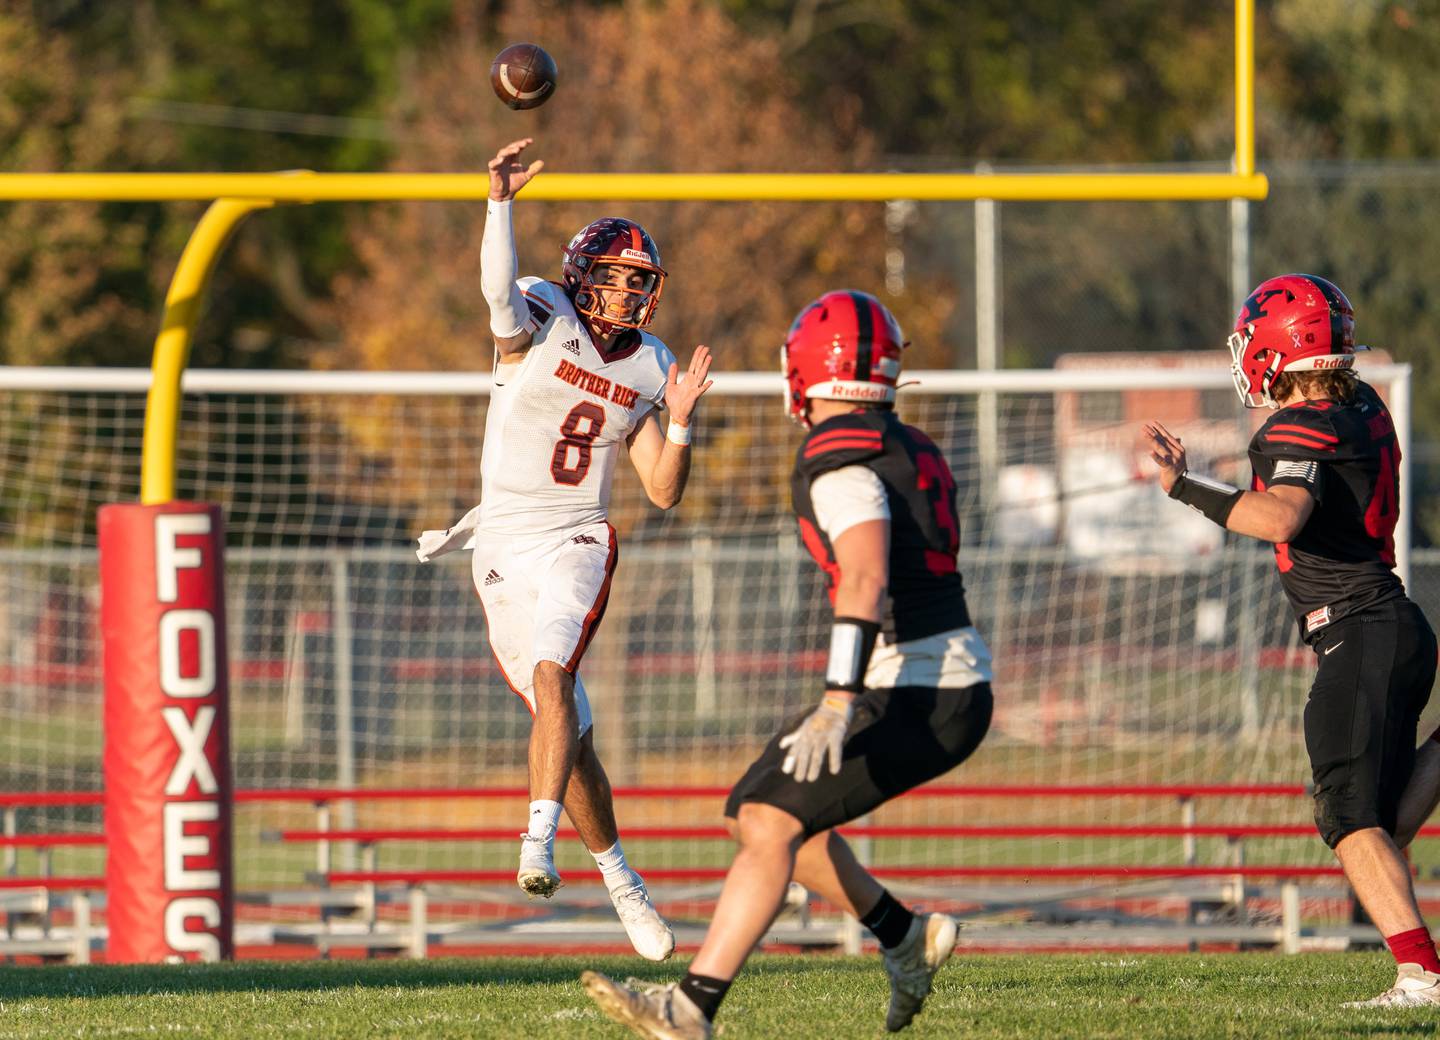 Brother Rice's Jack Launch (8) passed the ball against Yorkville during a a 7A state football playoff game at Yorkville High School on Saturday, Nov. 6, 2021.